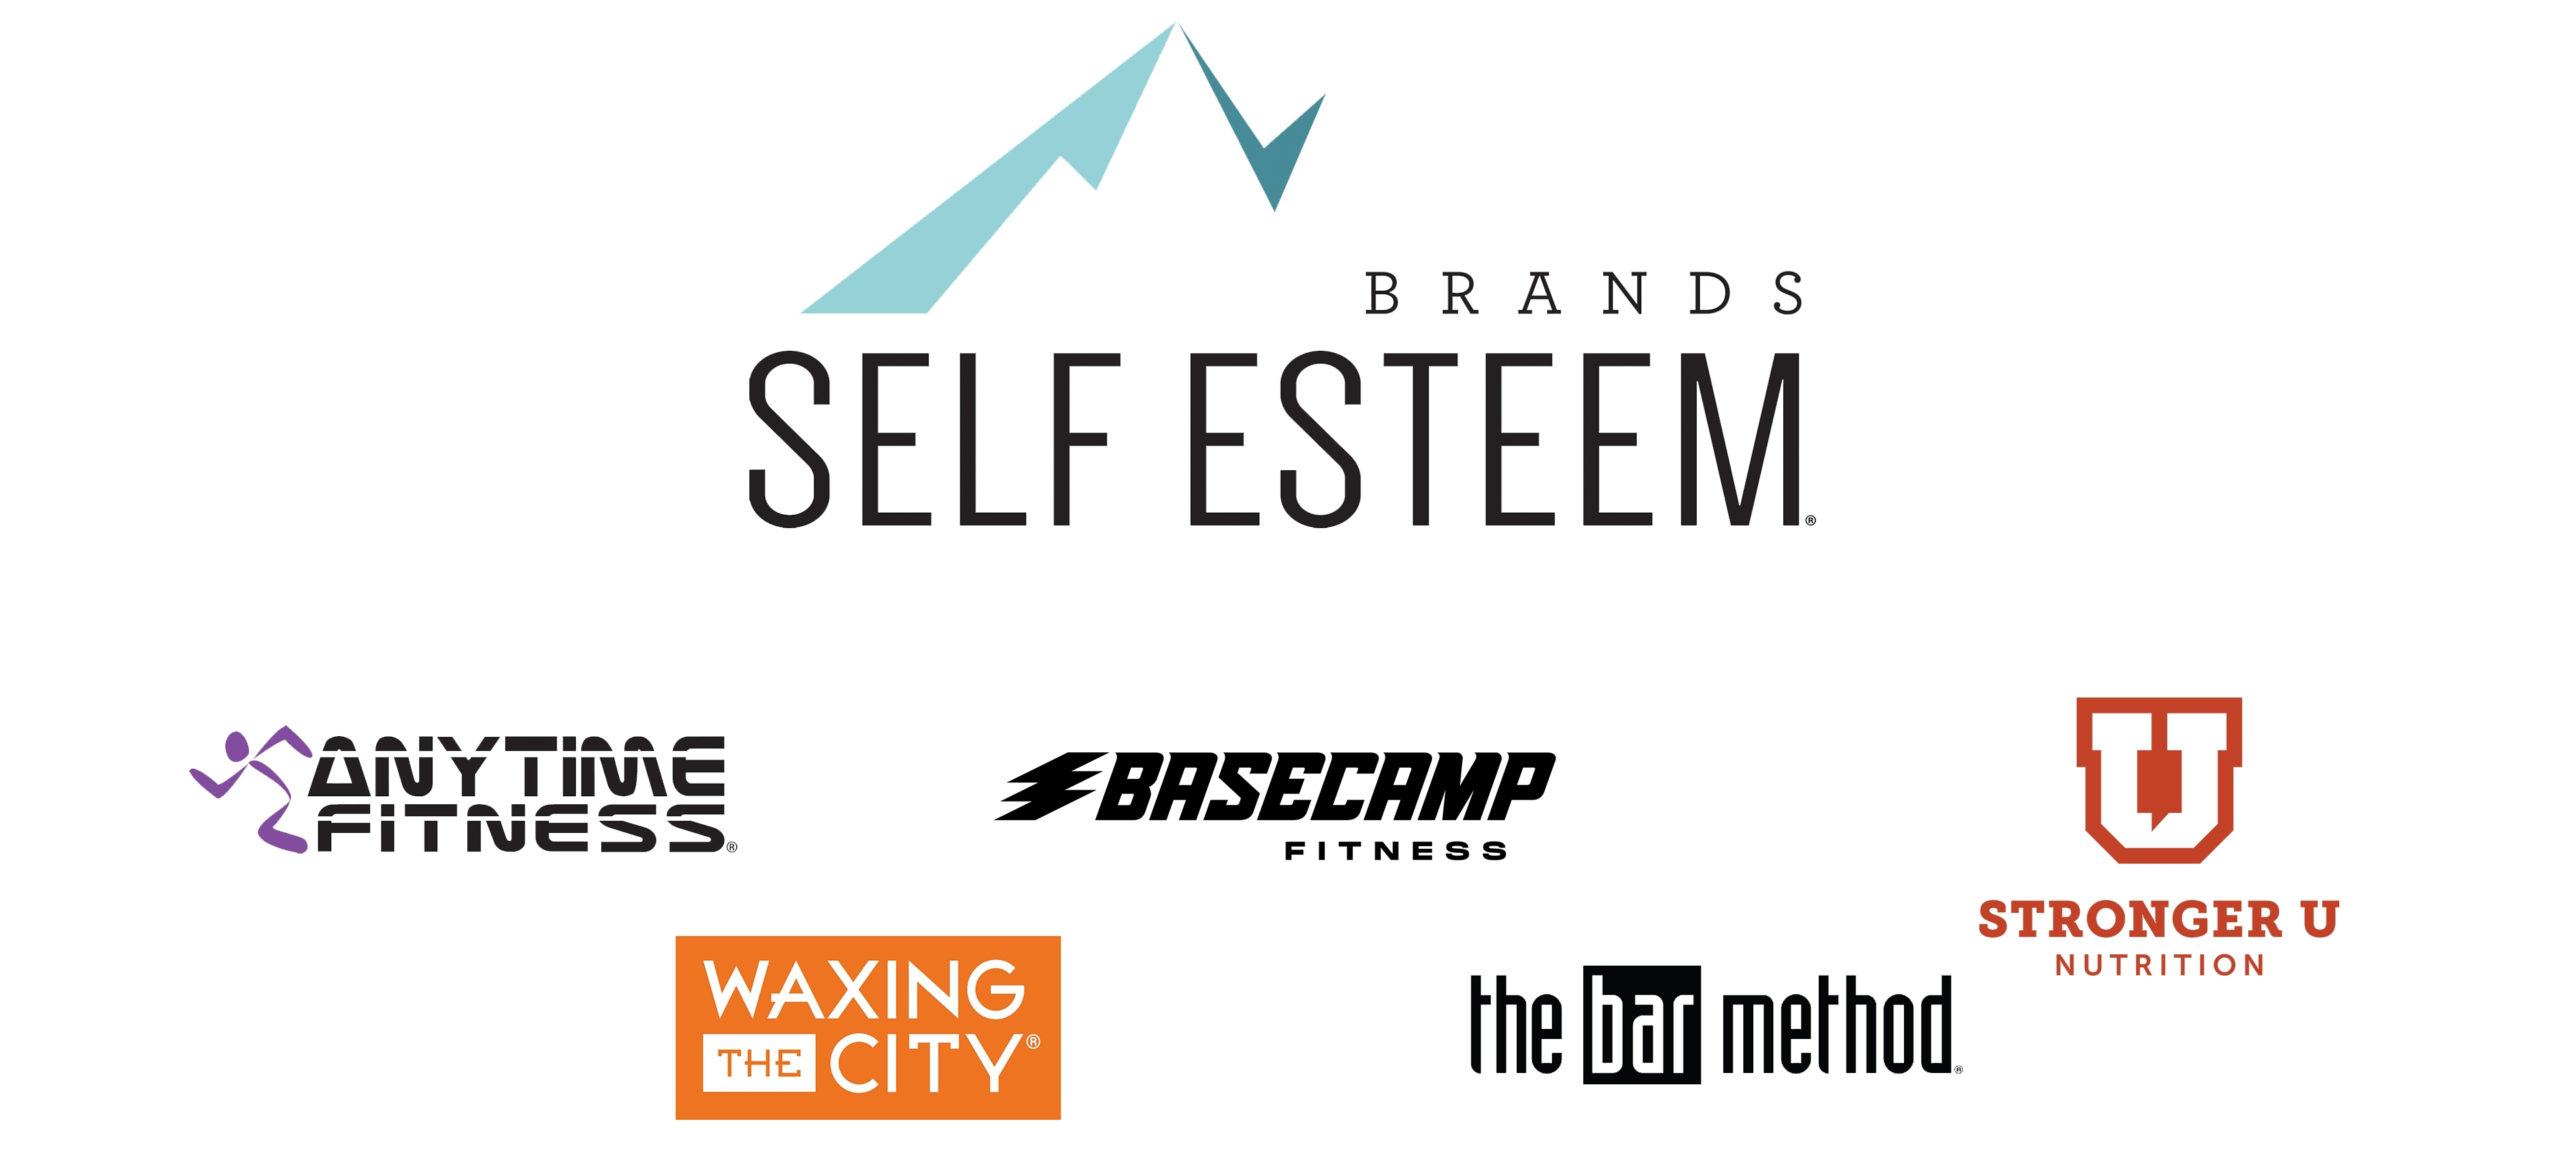 Anytime Fitness' Parent Company Acquires The Bar Method - With